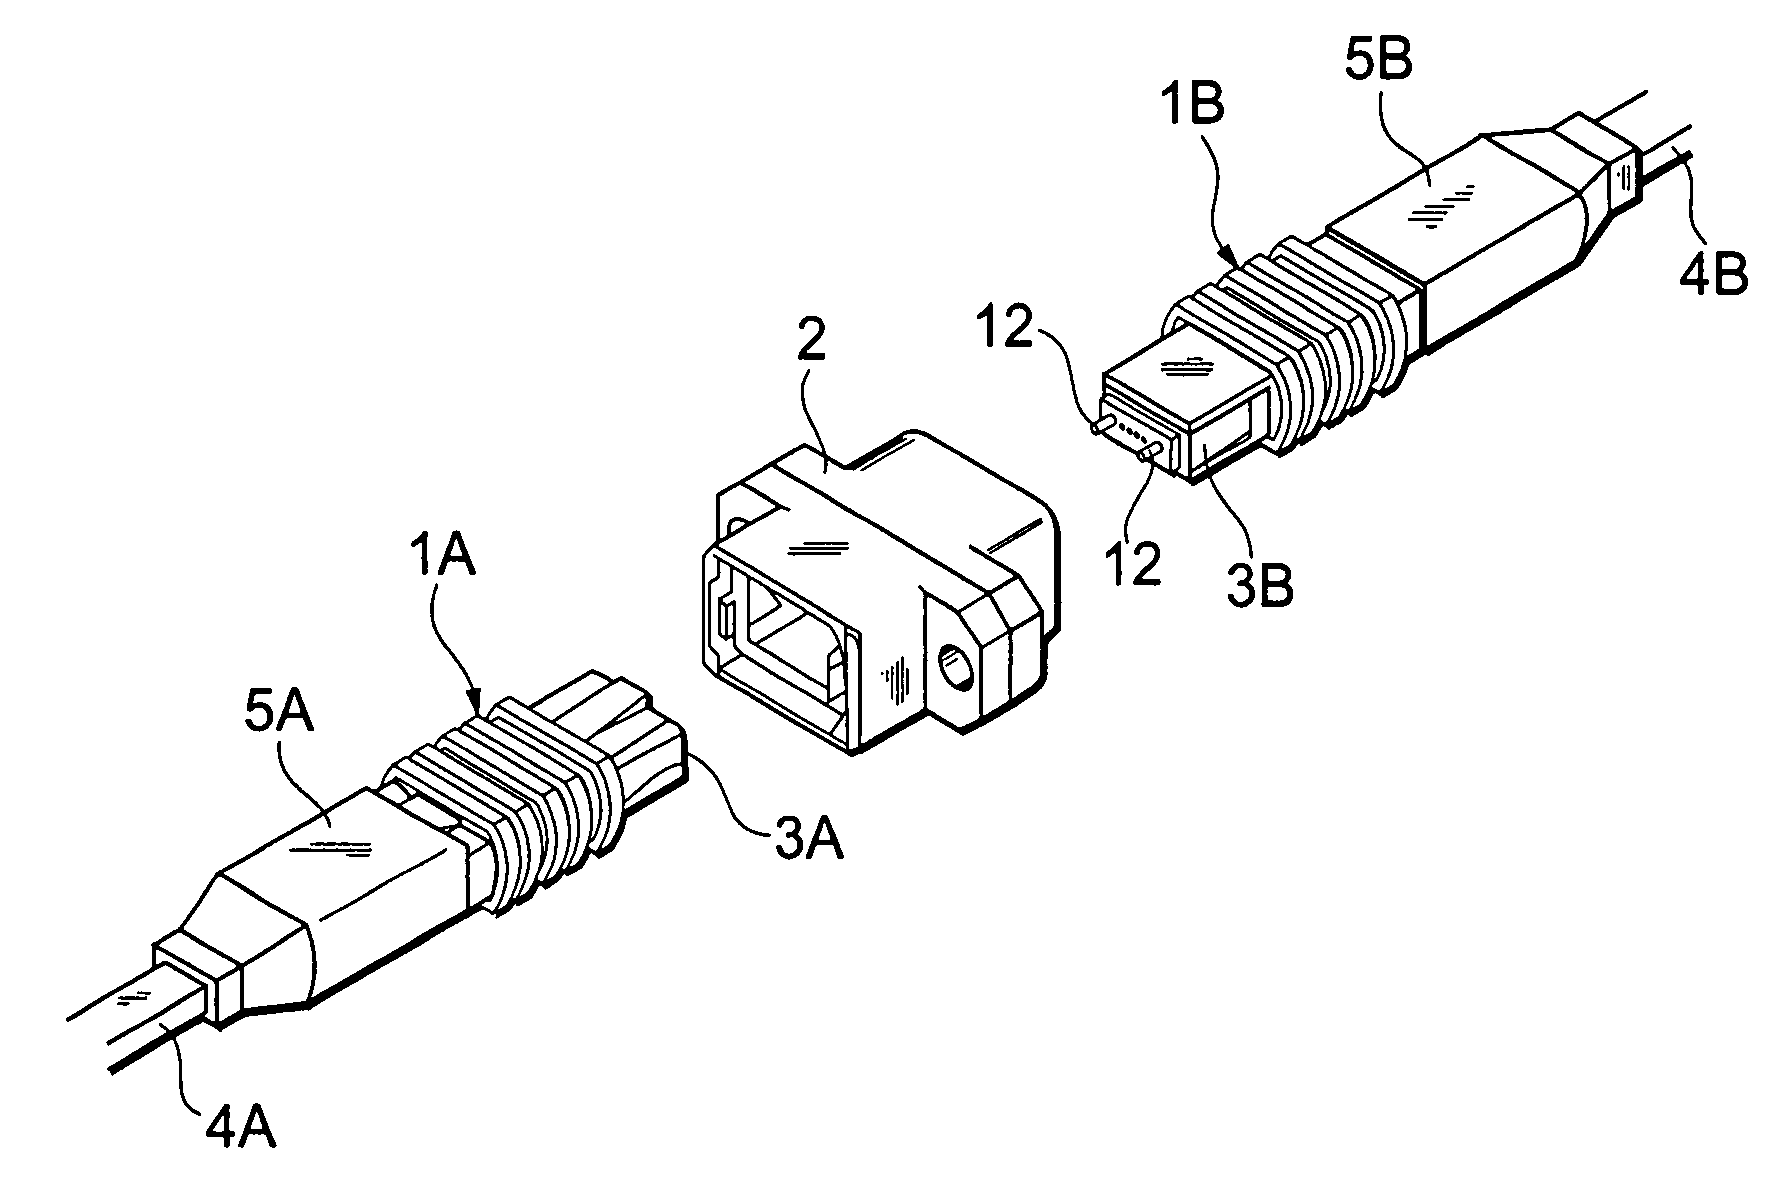 Optical connector and backplane assembly